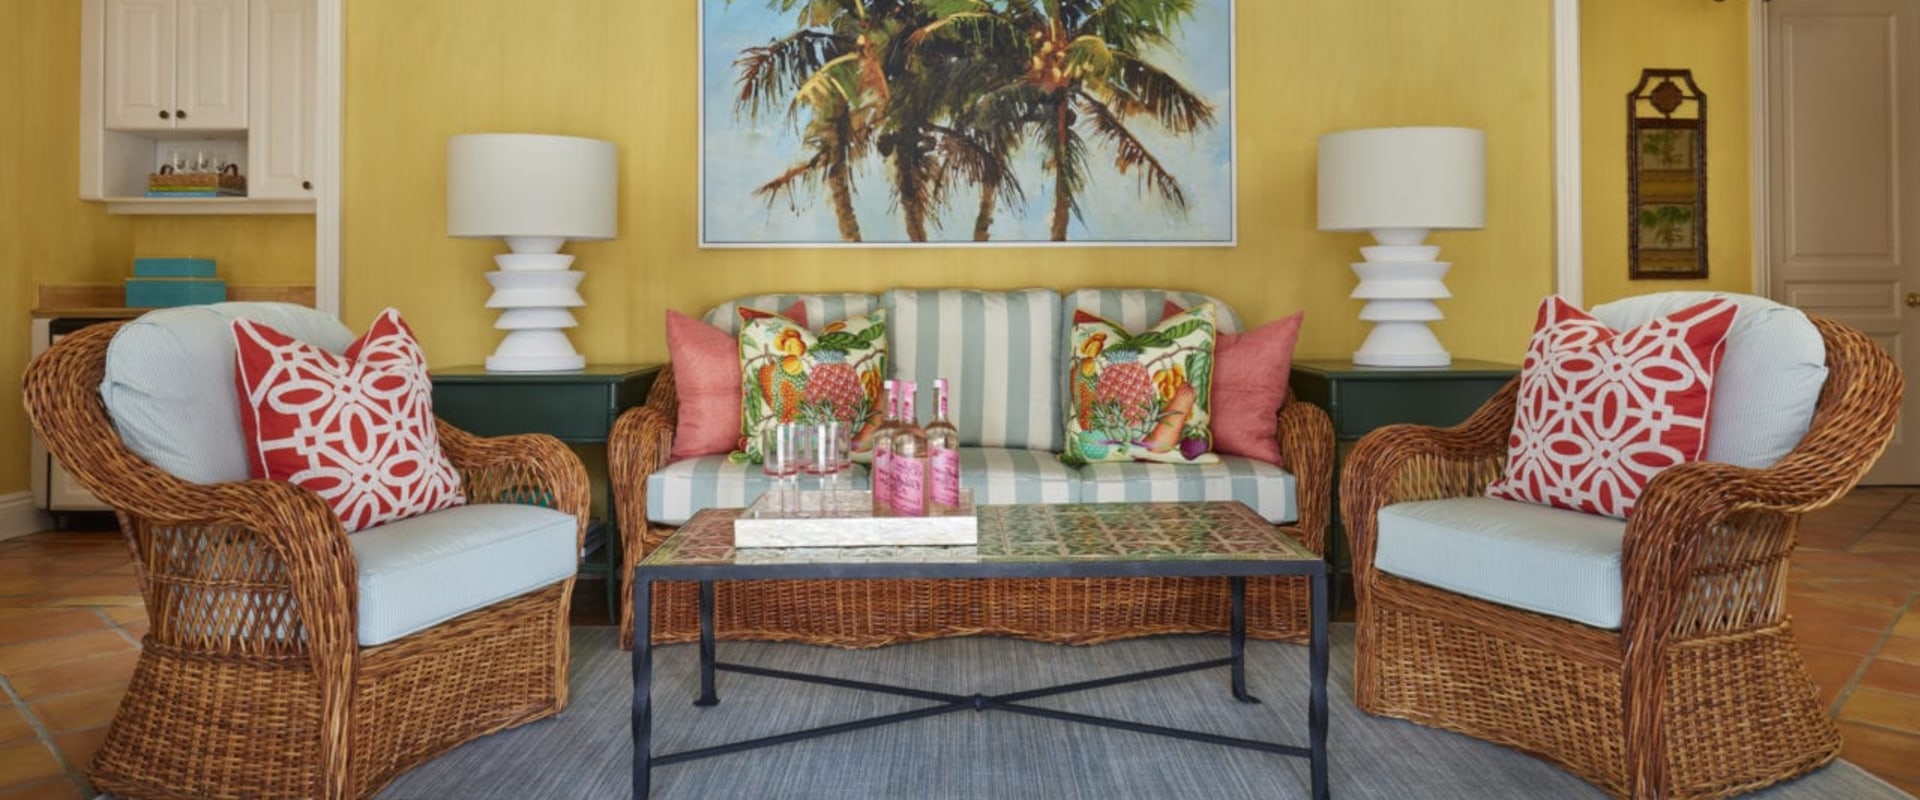 The Best Magazines for Home Decor and Interior Design in Cape Coral, FL: An Expert's Perspective